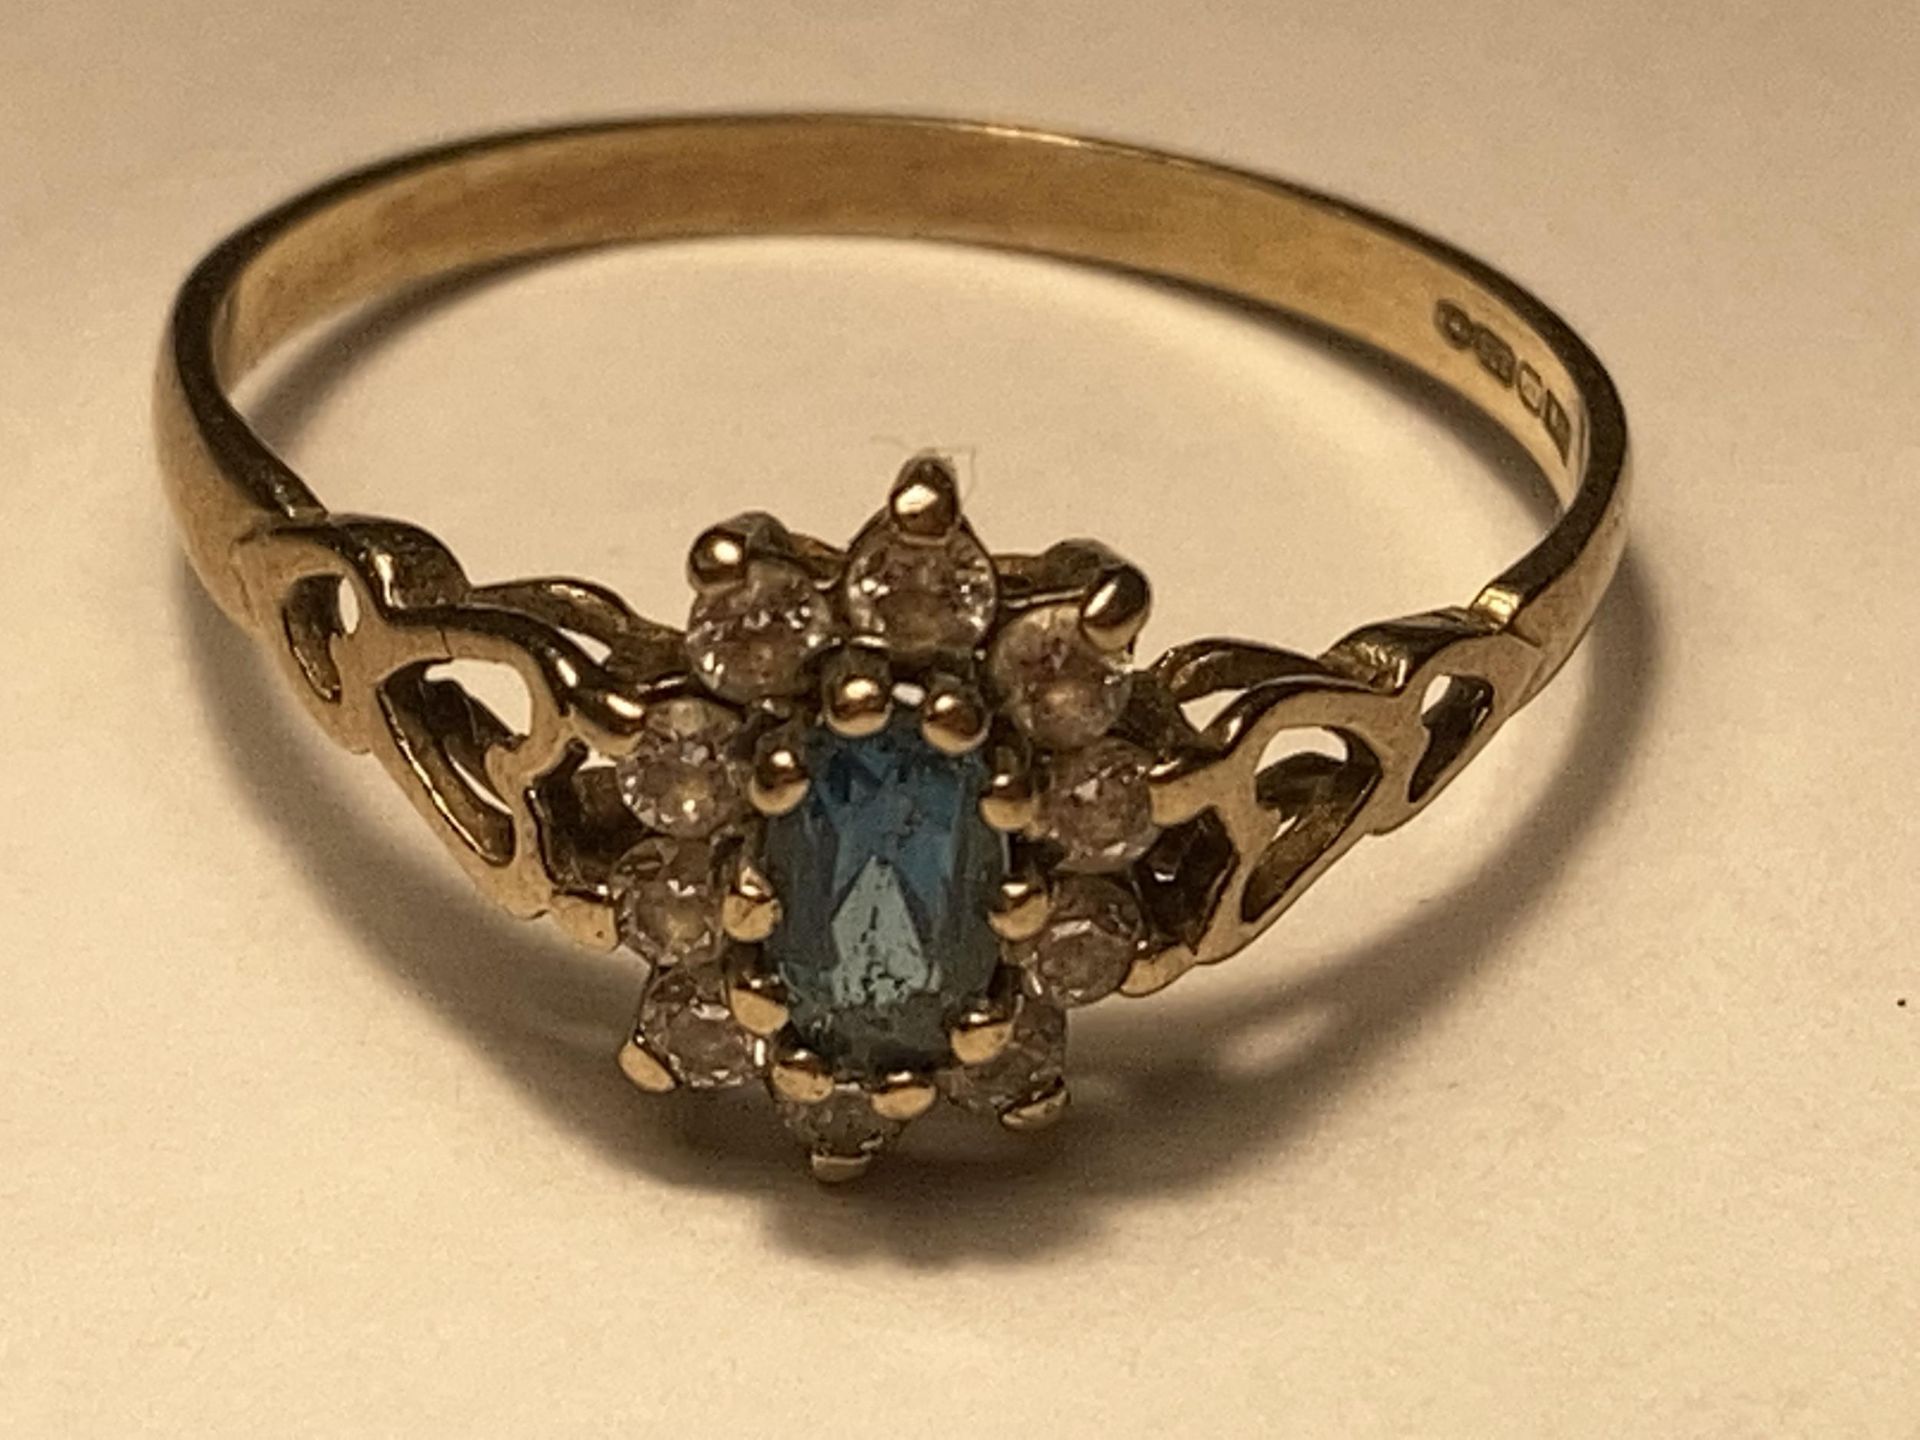 A 9 CARAT GOLD RING WITH A CENTRE BLUE TOPAZ STONE SURROUNDED BY CUBIC ZIRCONIAS SIZE O/P